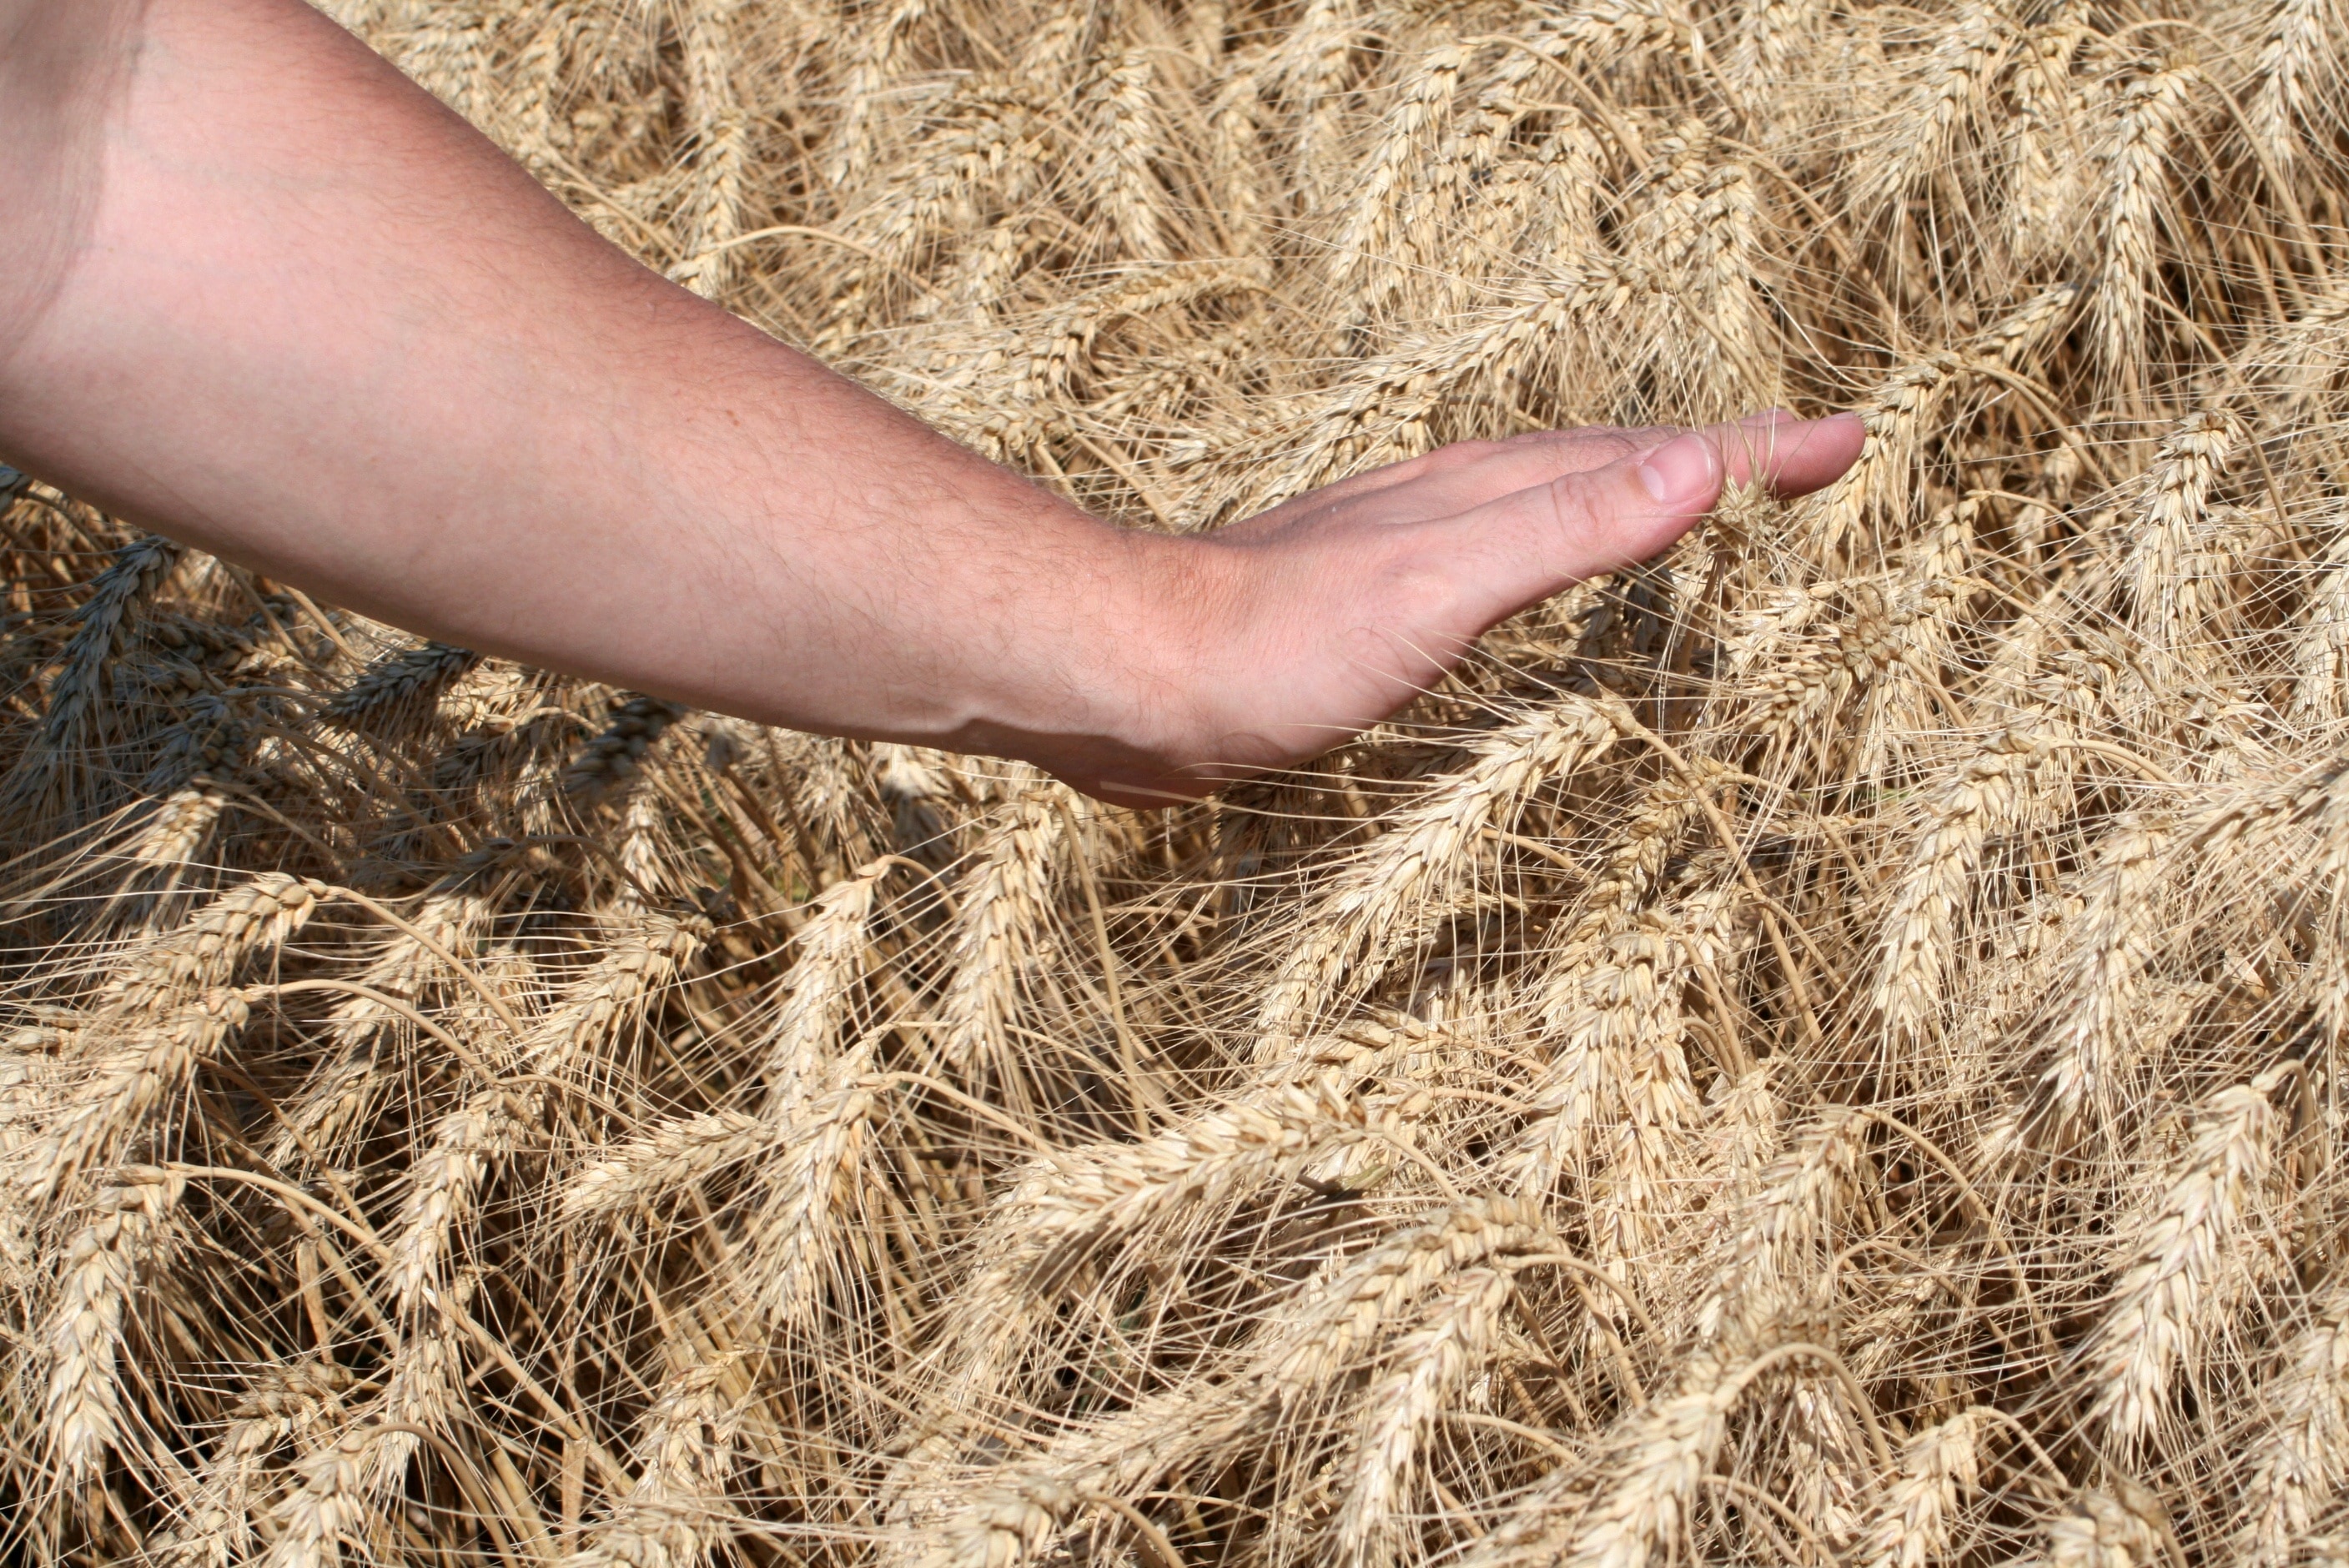 Sowing, Cornfield, Wheat, Harvest, cereal plant, human hand